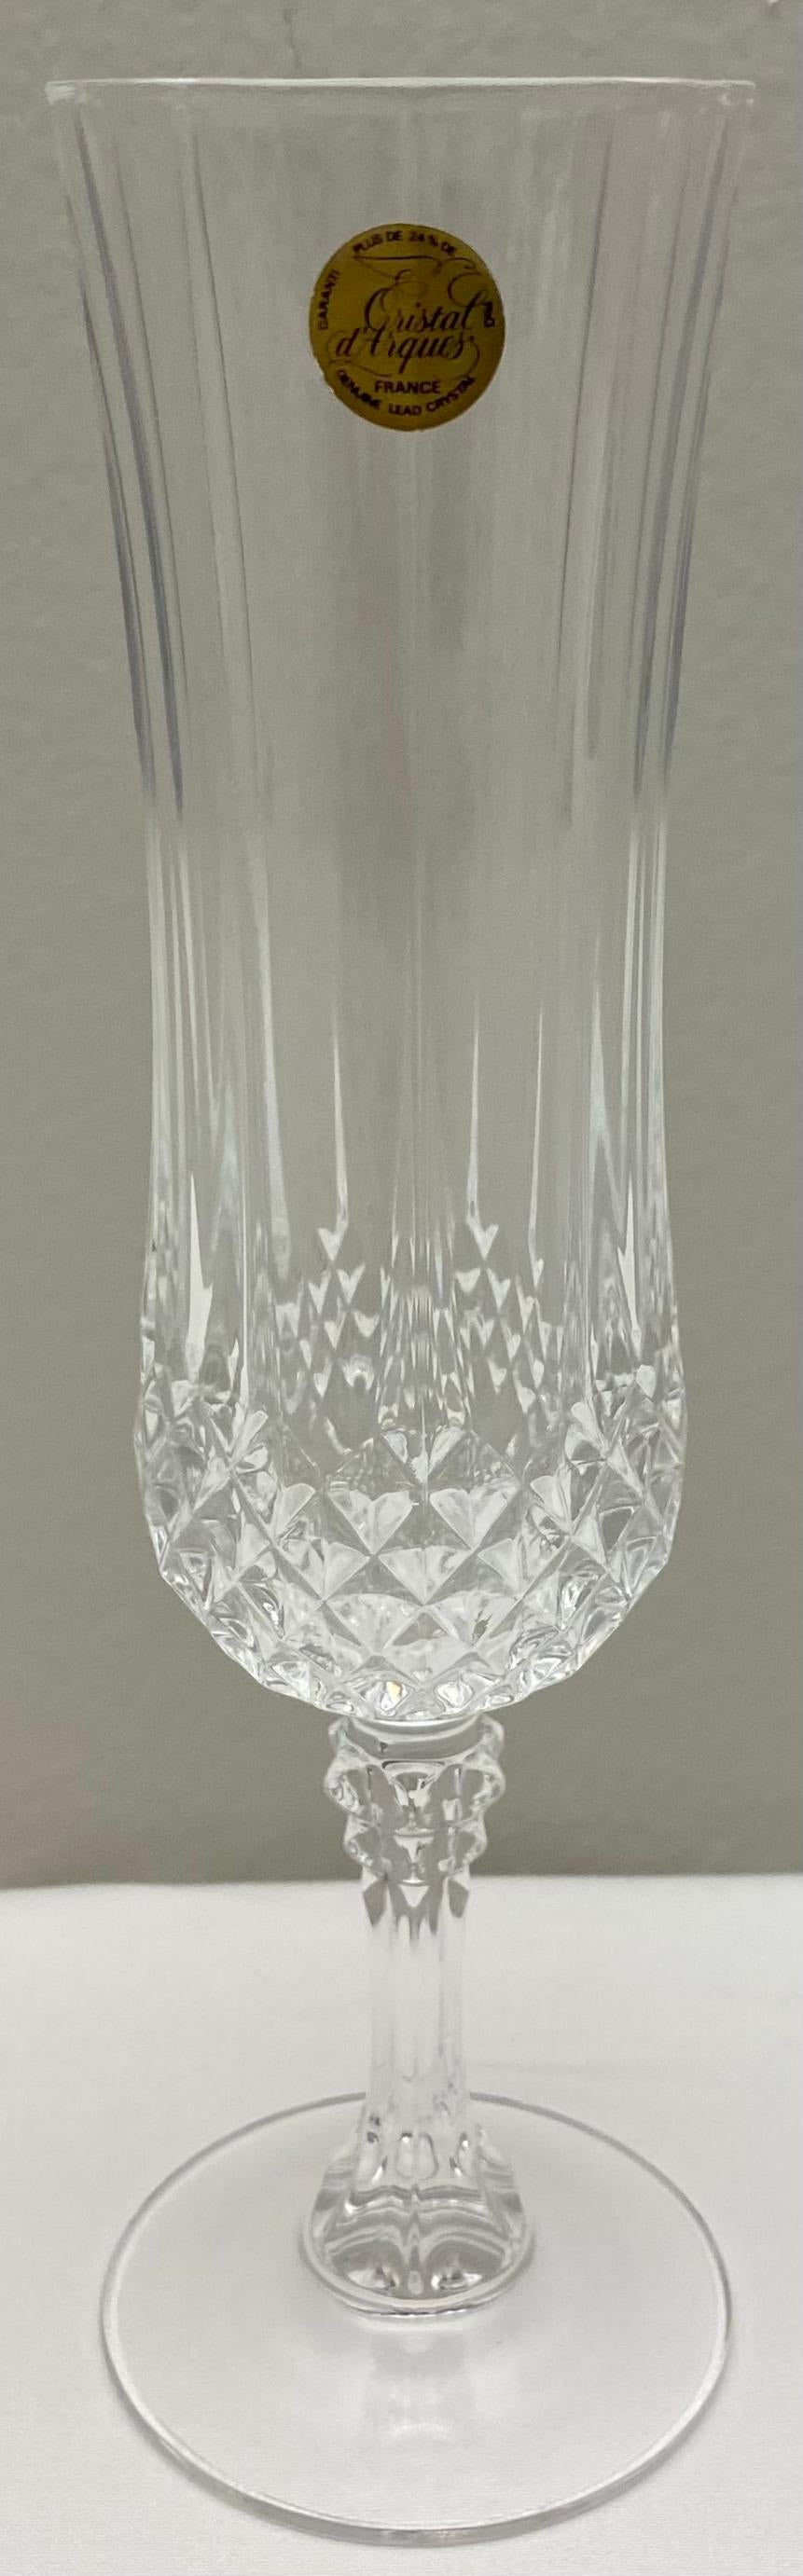 French Crystal Champagne Flutes, Set of 6 in Original Box For Sale 1